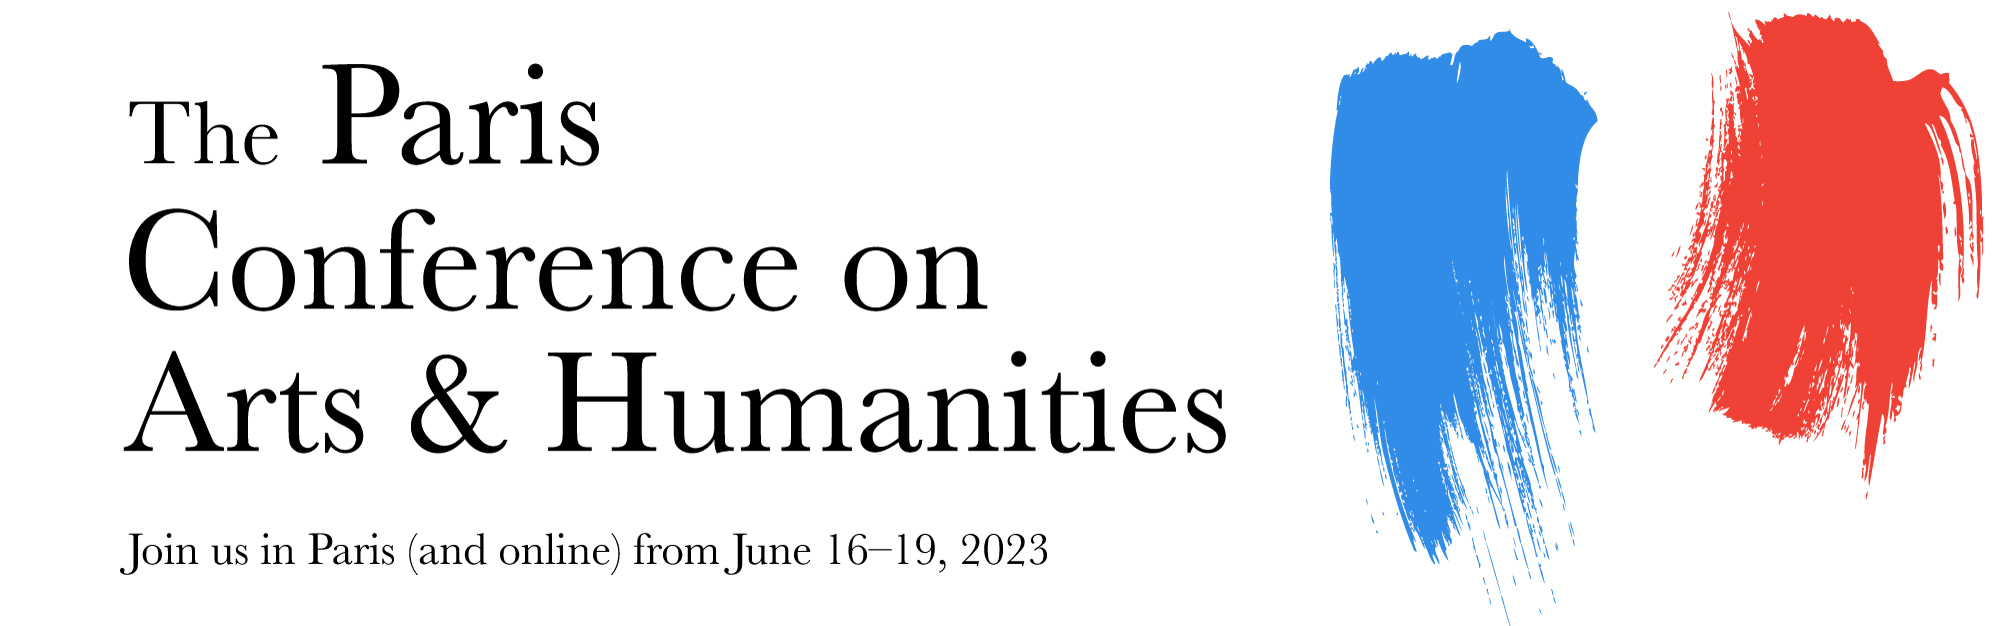 The 2nd Paris Conference on Arts & Humanities (PCAH2023) Logo